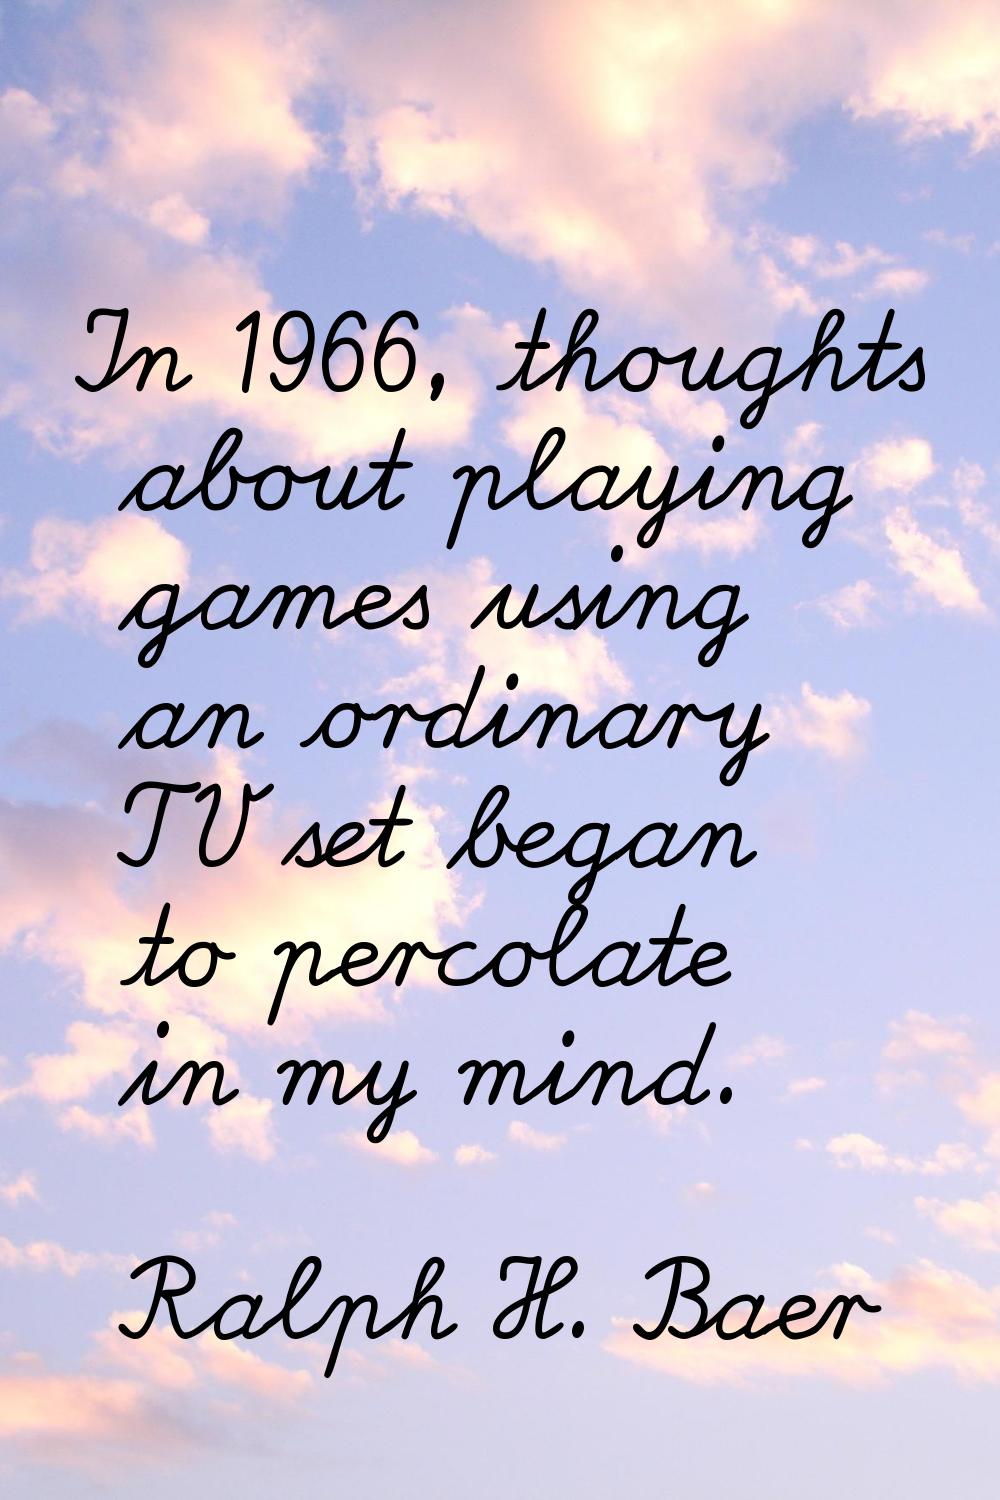 In 1966, thoughts about playing games using an ordinary TV set began to percolate in my mind.